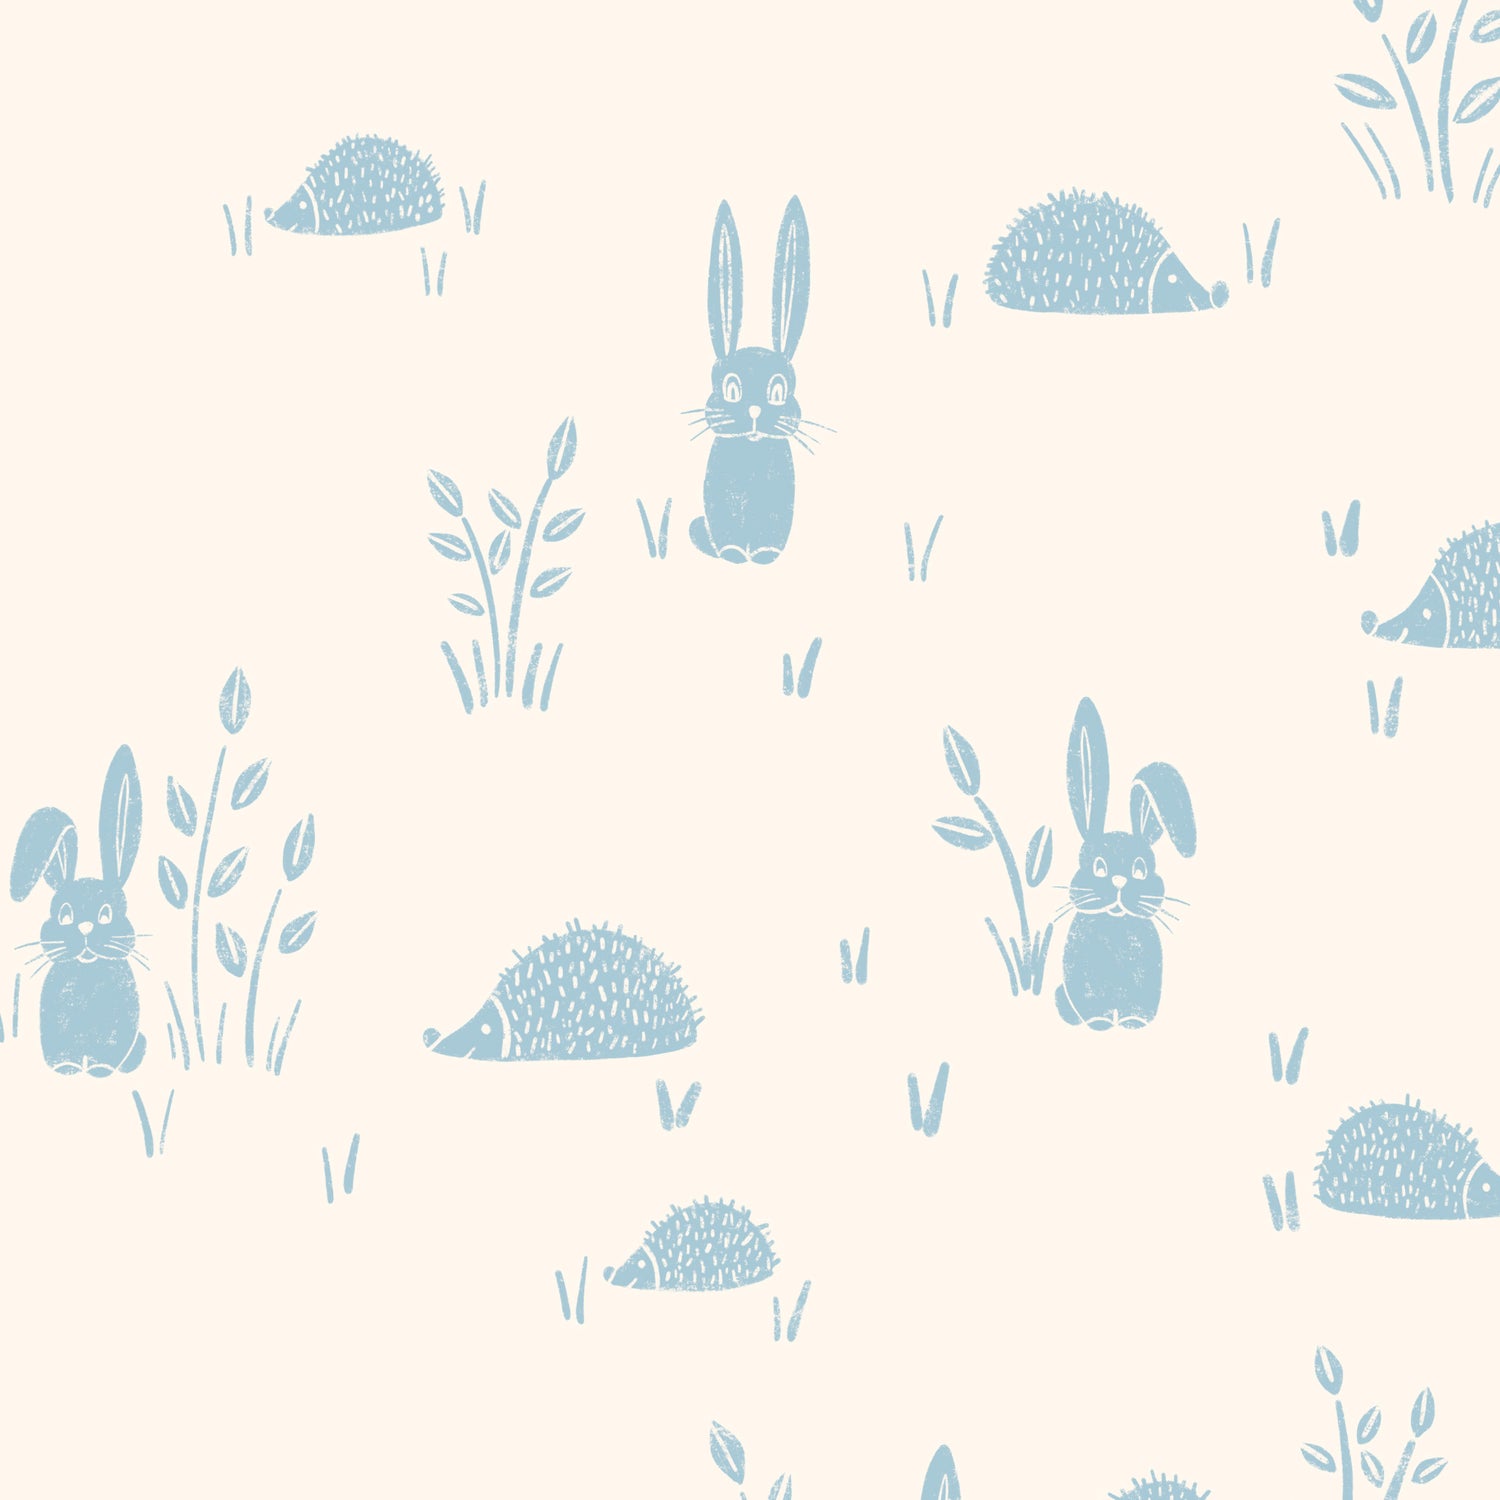 Hedgehogs and Rabbits Wallpaper in Blue shown in a close up view.